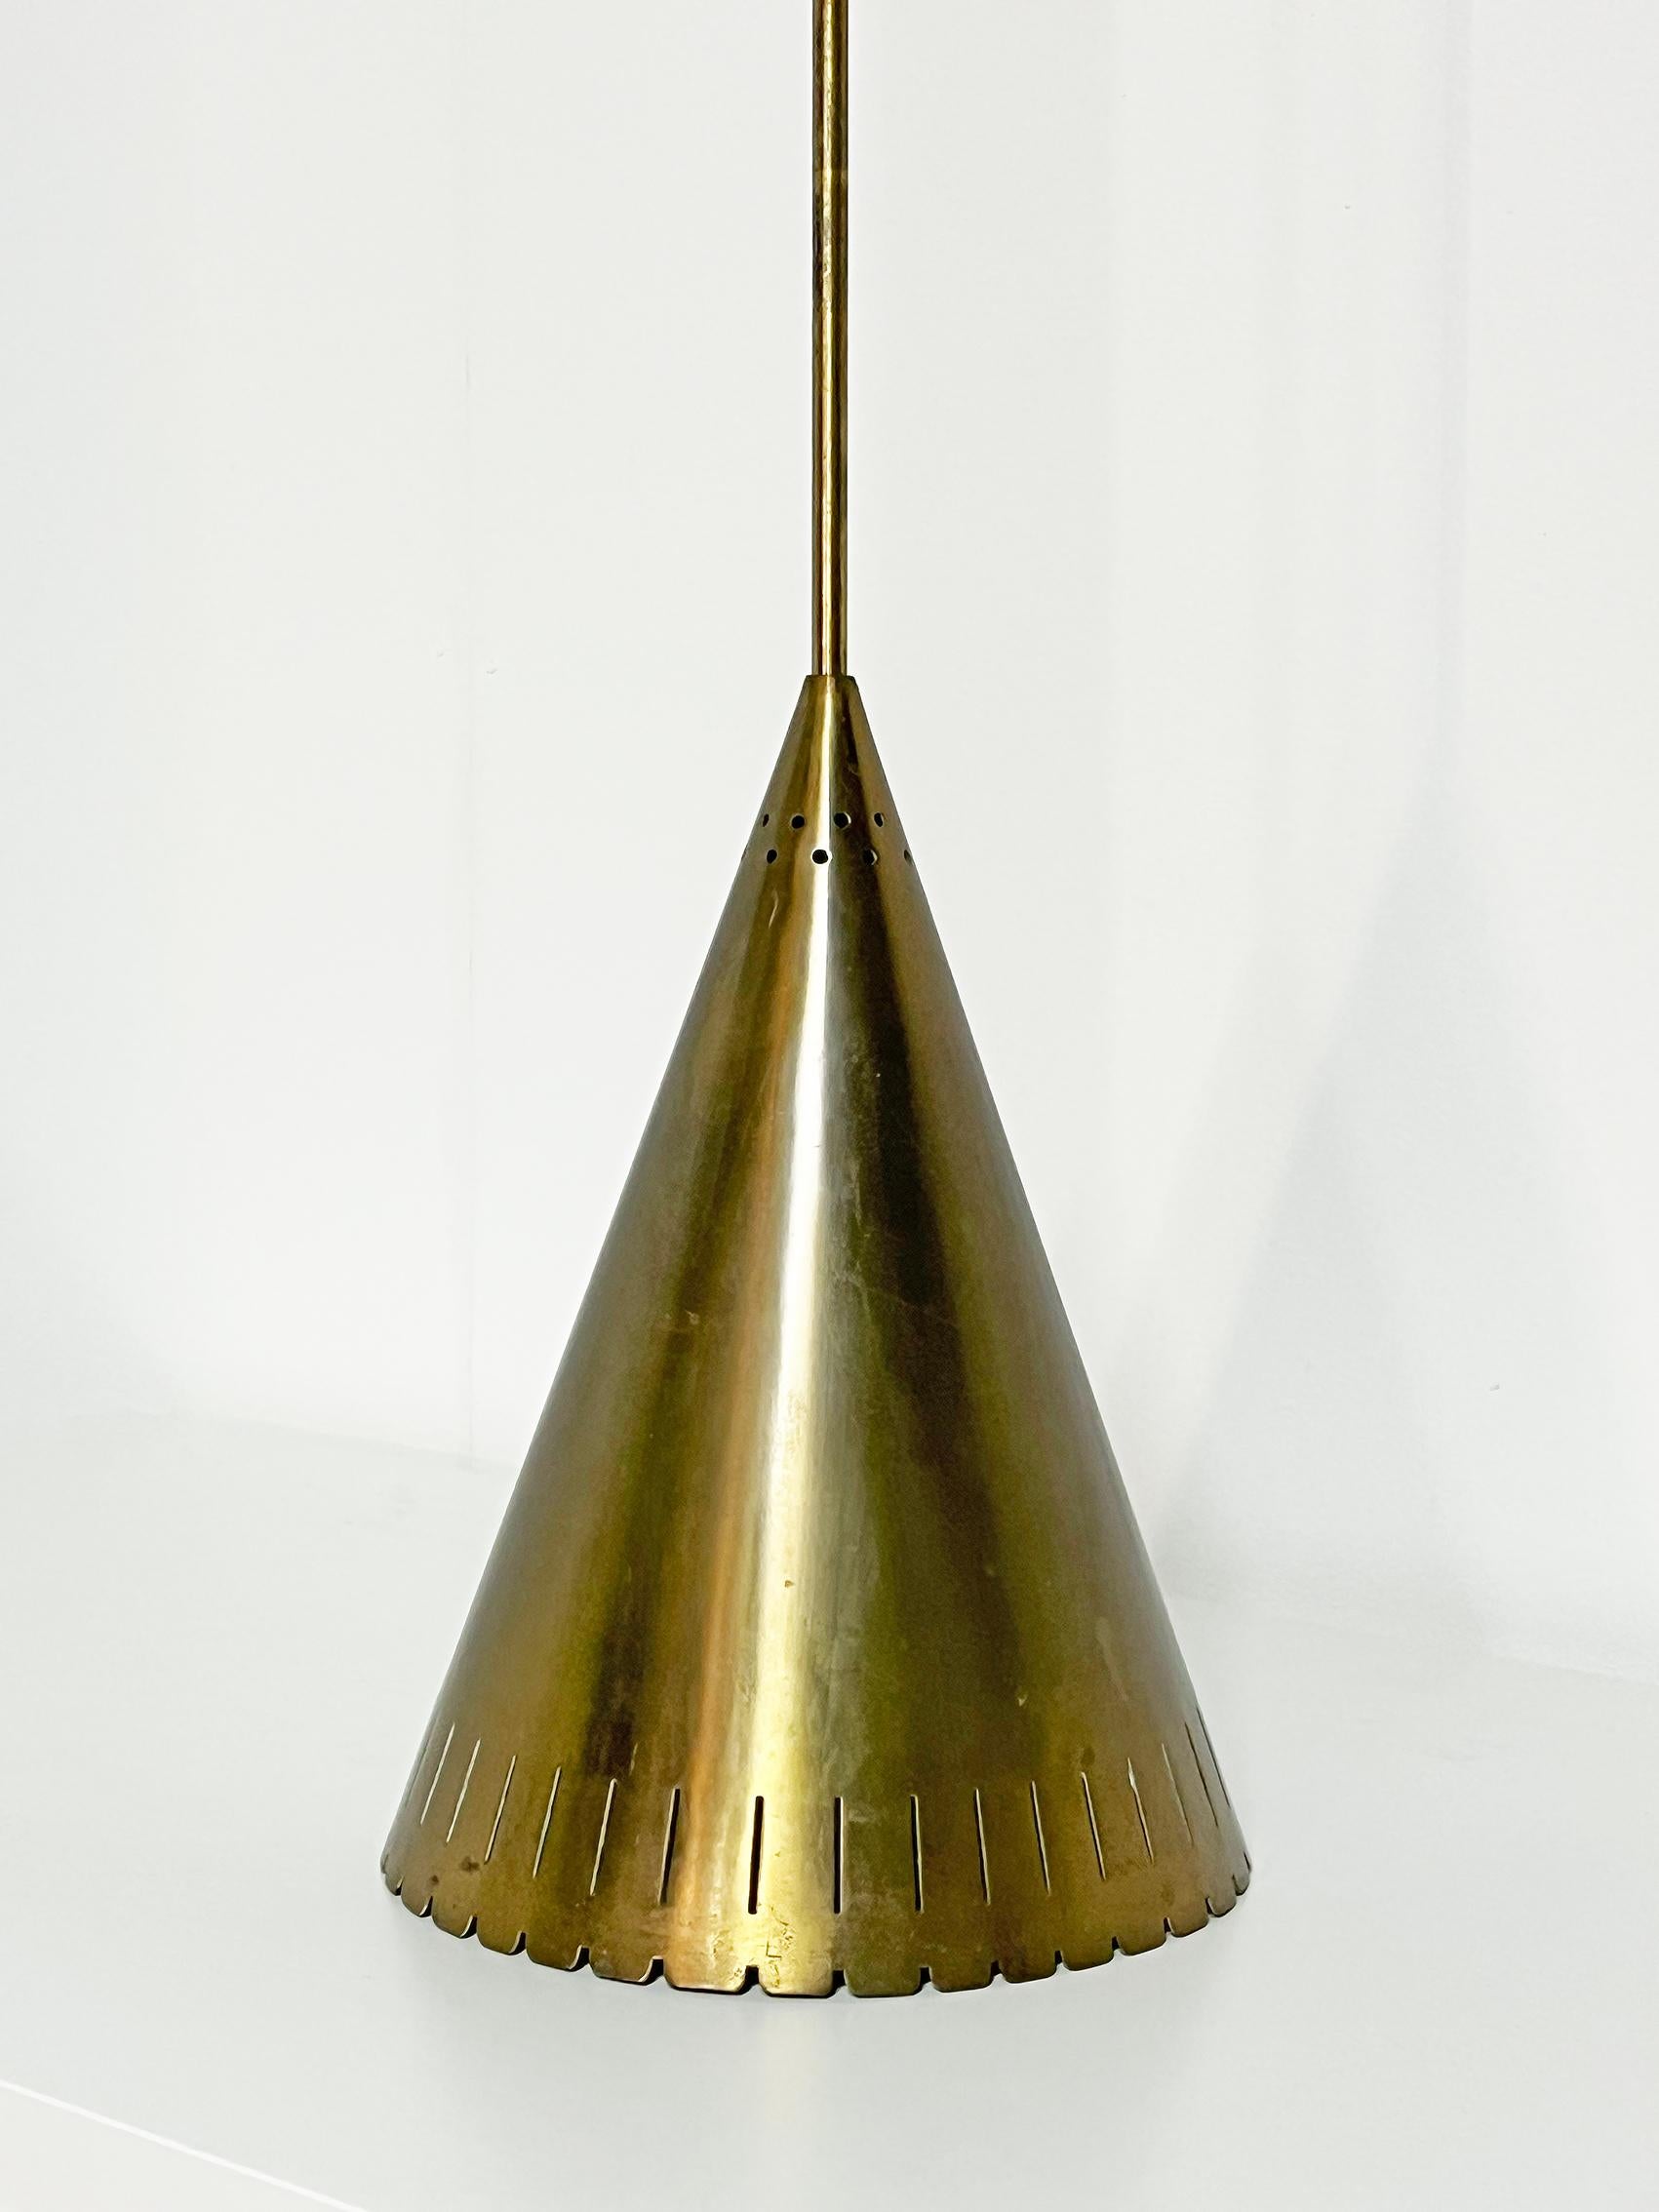 Rare Scandinavian Modern ceiling light in brass, model 11773, attributed to Harald Notini, Böhlmarks Lampfabrik 1940’s.
Good vintage condition, wear and patina consistent with age and use.
Brass patina and scratches, small dents. Wear and blemishes